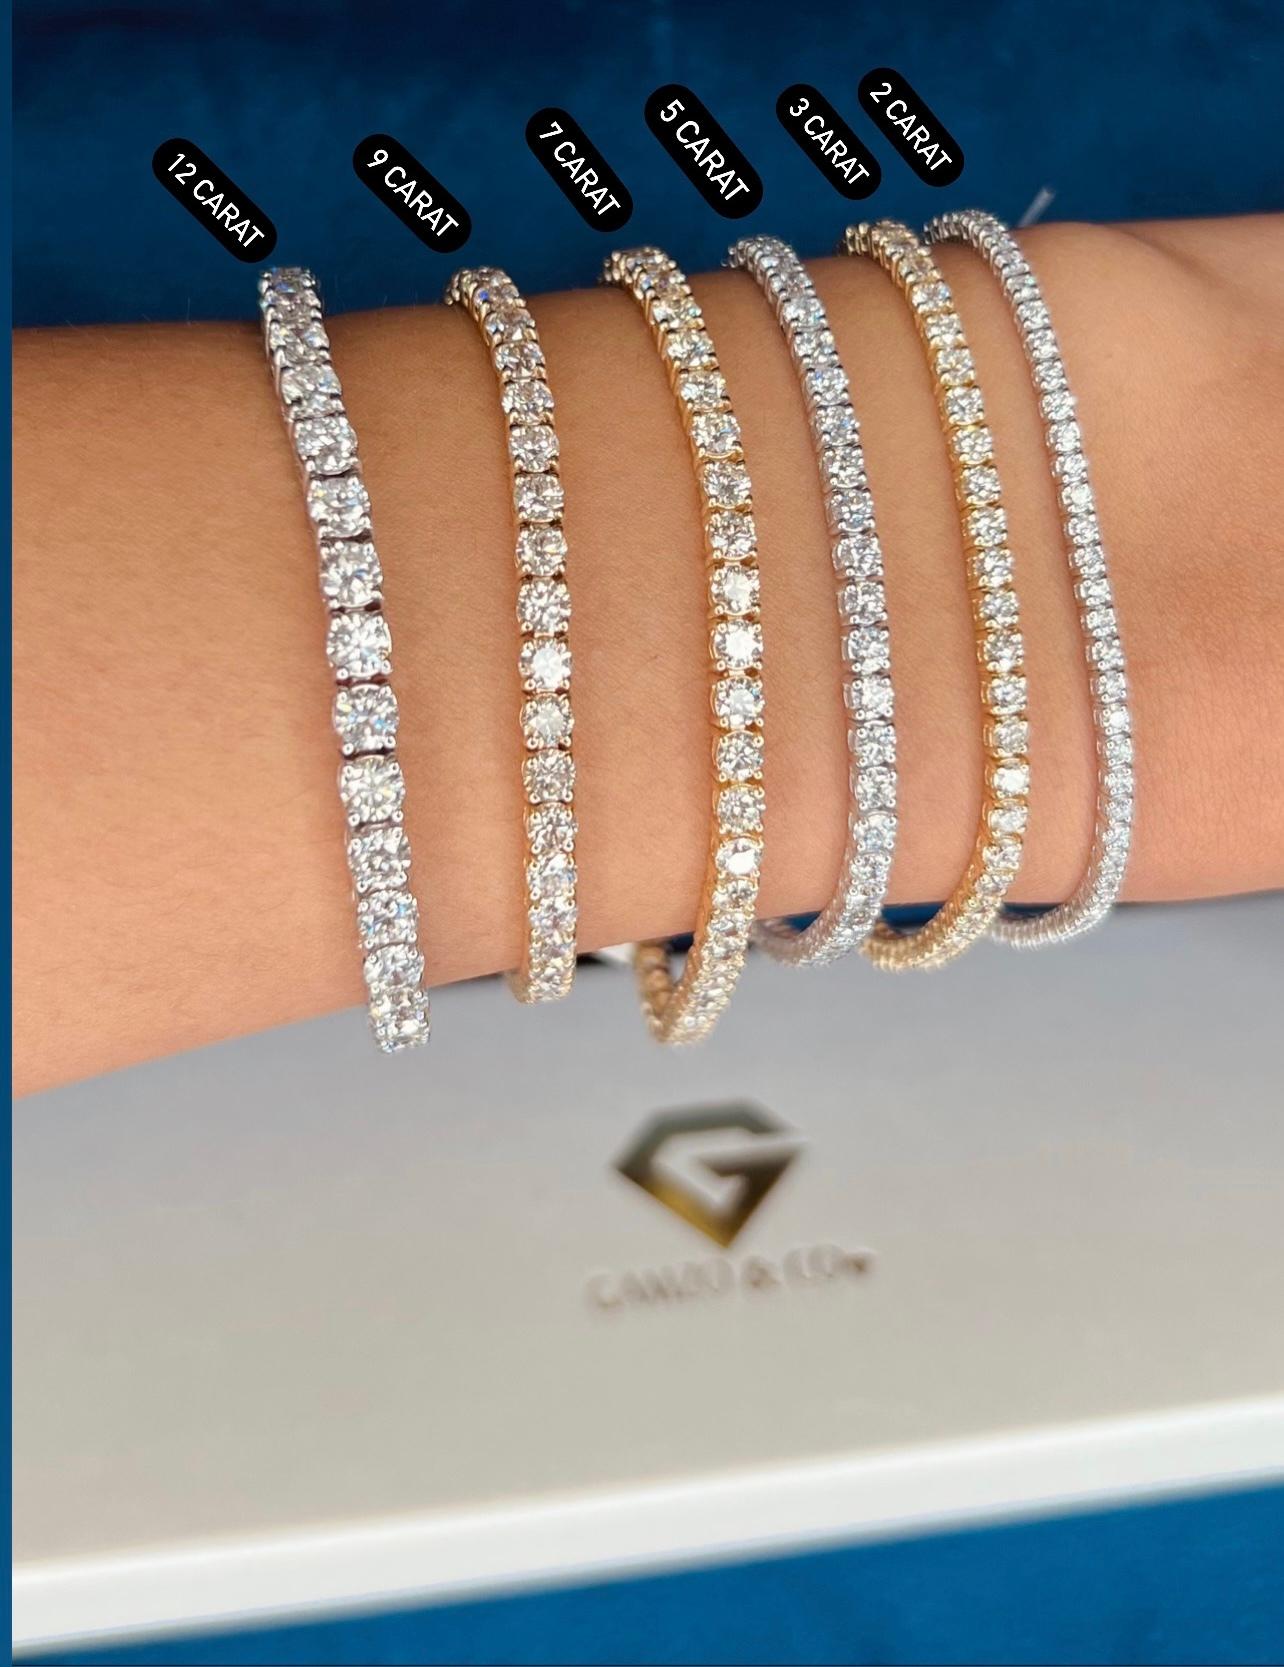 This diamond tennis bracelet features beautifully cut round diamonds set gorgeously in 14k gold.

Metal: 14k Gold
Diamond Cut: Round Natural Diamond 
Total Diamond Carats: 5ct
Diamond Clarity: VS
Diamond Color: F-G
Color: Yellow Gold
Bracelet